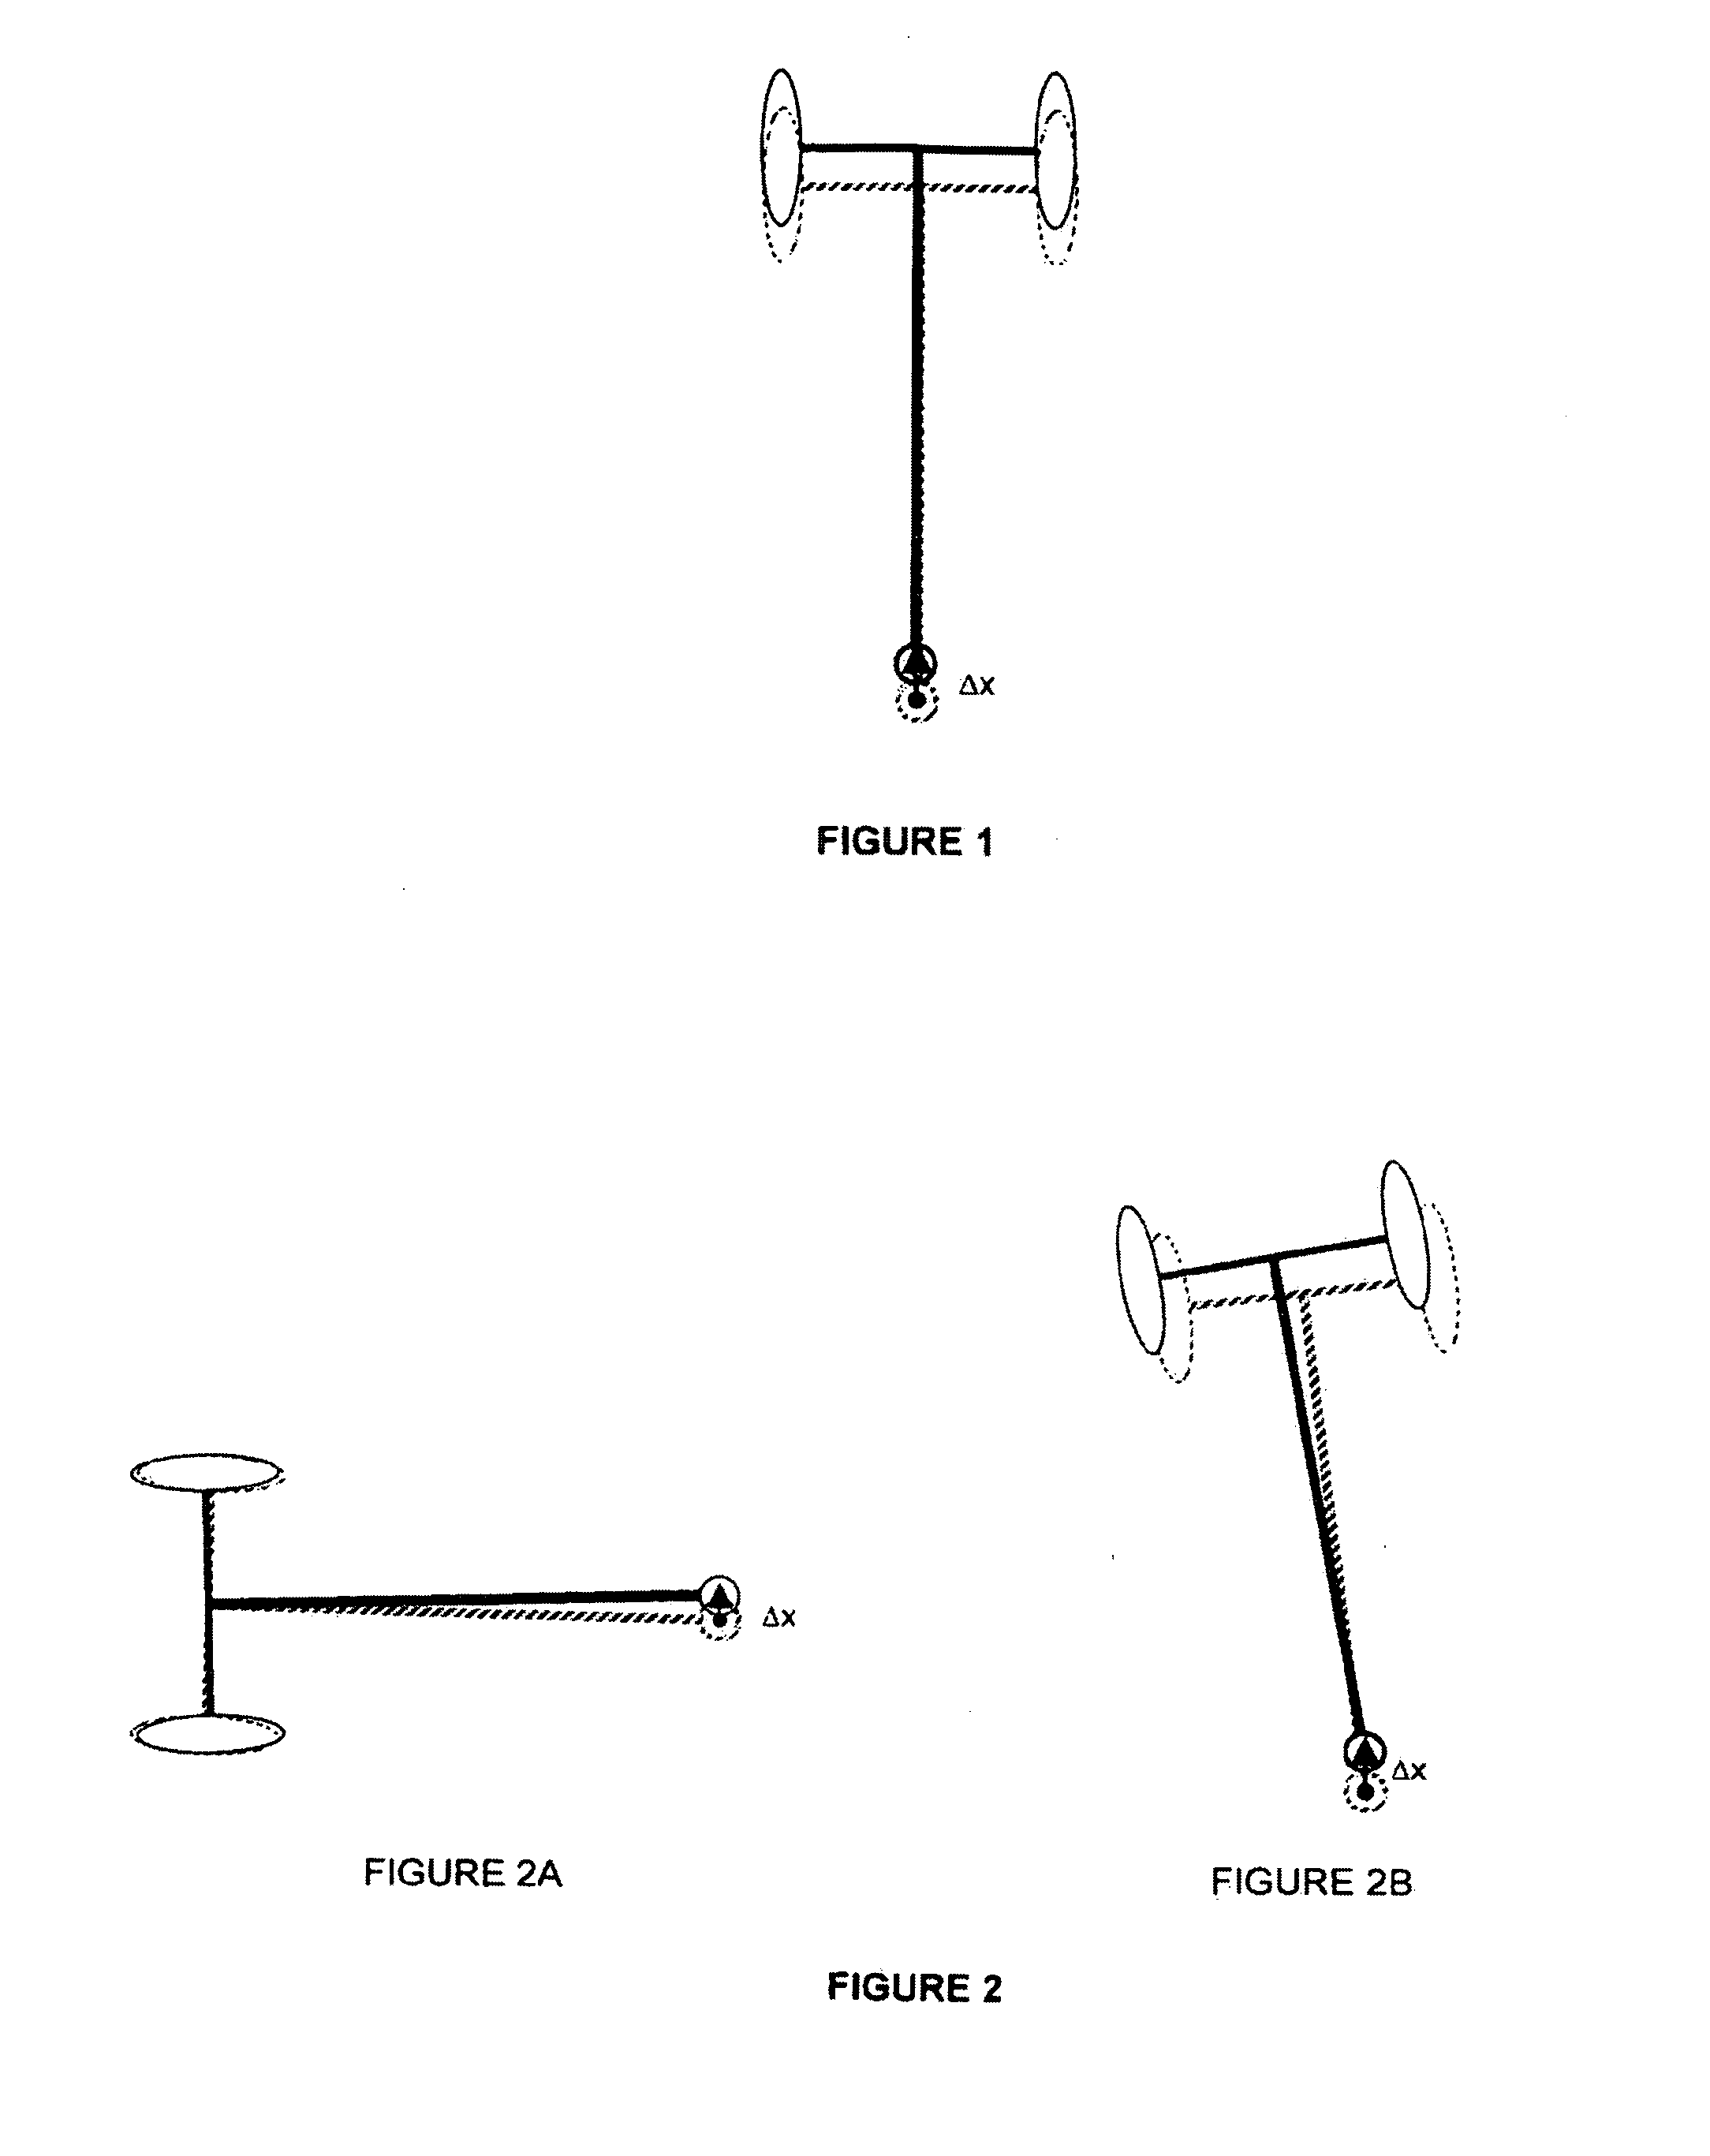 Trailer backing up device and table based method